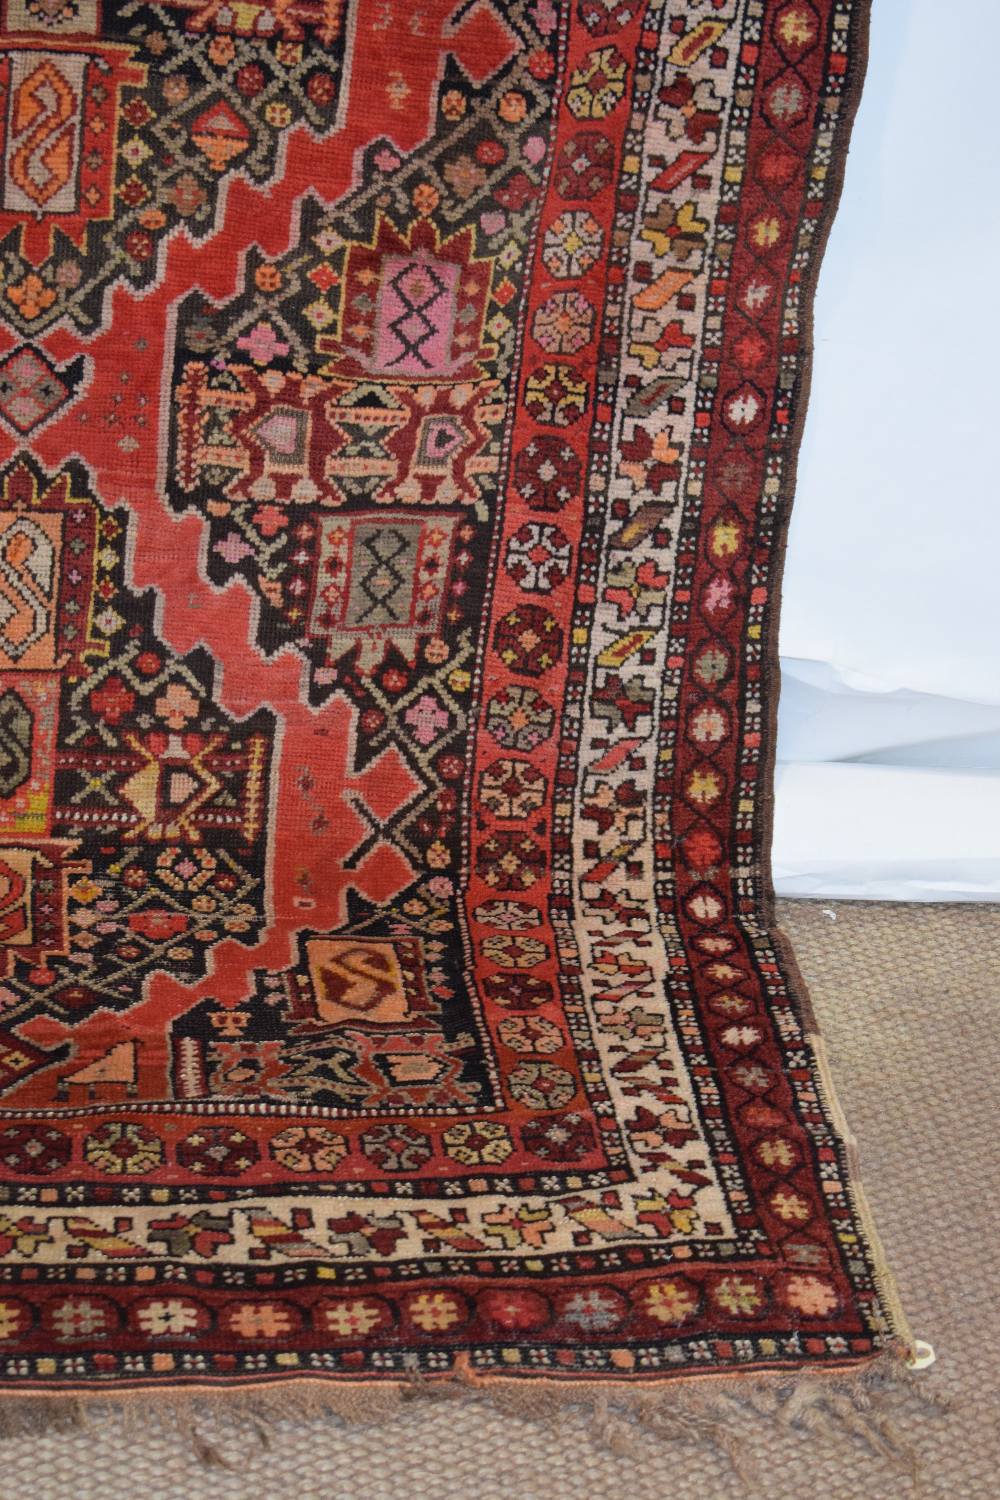 Karabakh rug, south west Caucasus, circa 1930s-40s, 10ft. 6in. X 4ft. 4in. 3.20m. X 1.32m. Date 1949 - Image 5 of 13